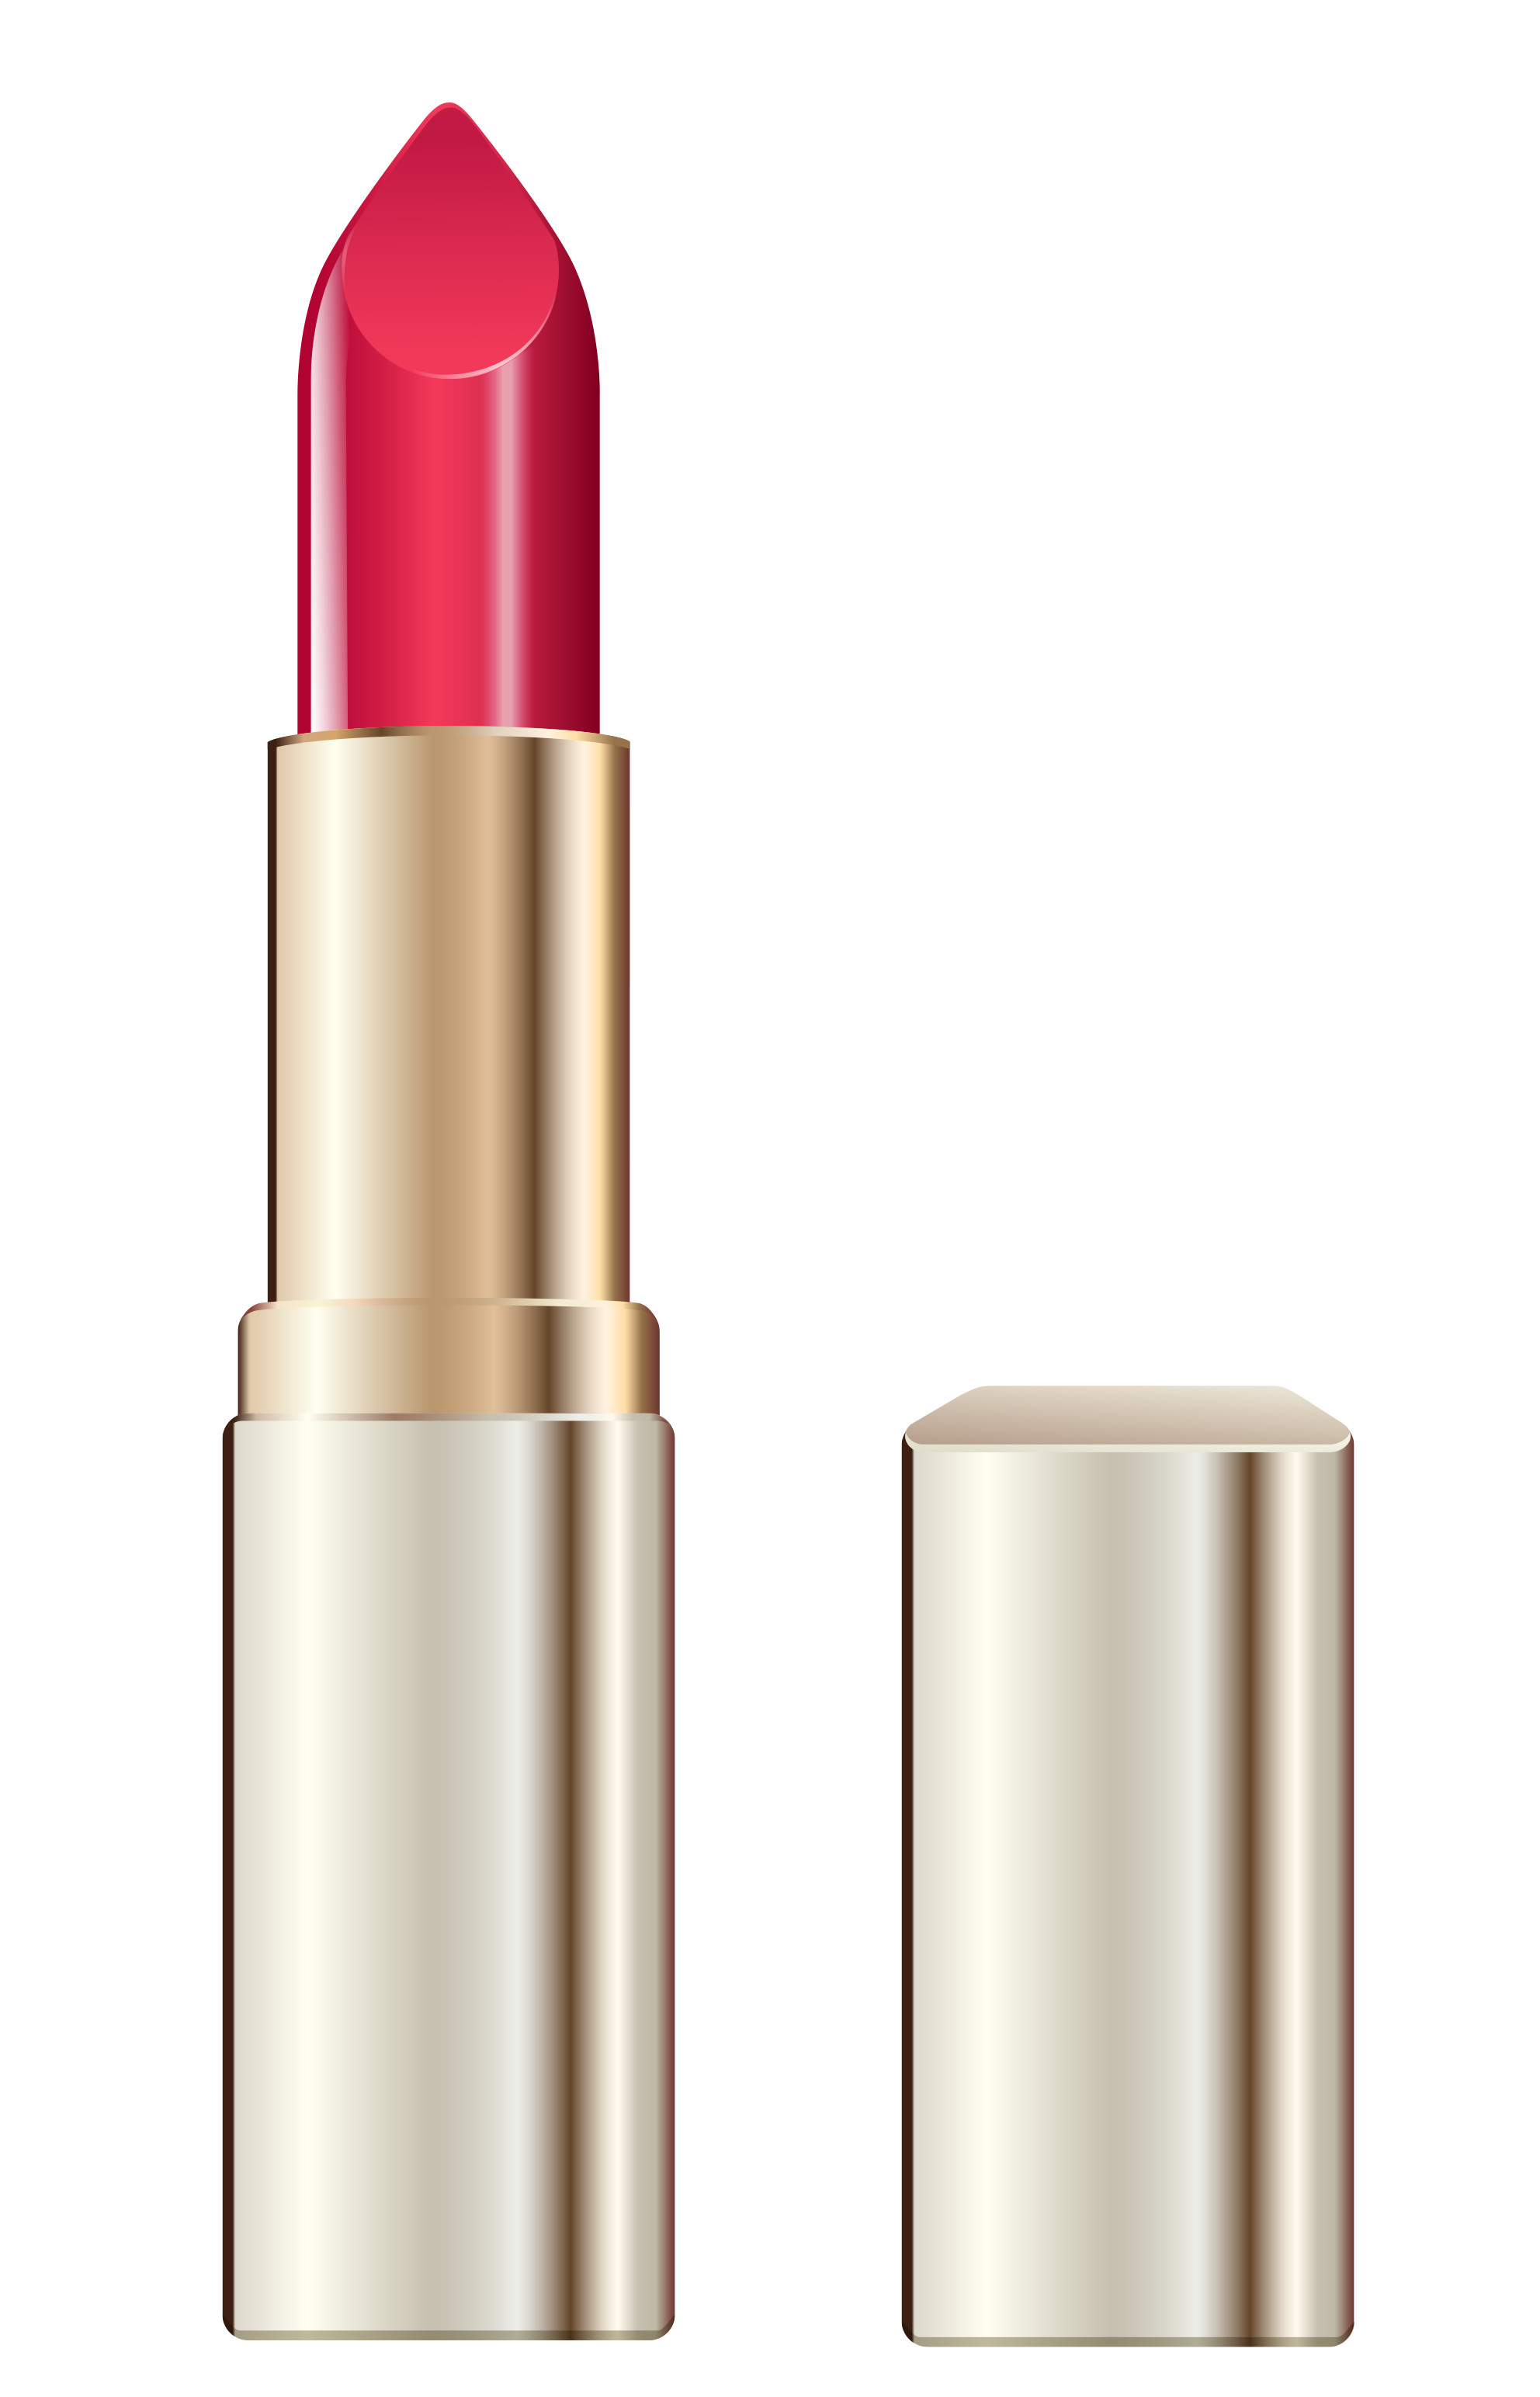 Lipstick Png Free Download - Lipstick, Transparent background PNG HD thumbnail